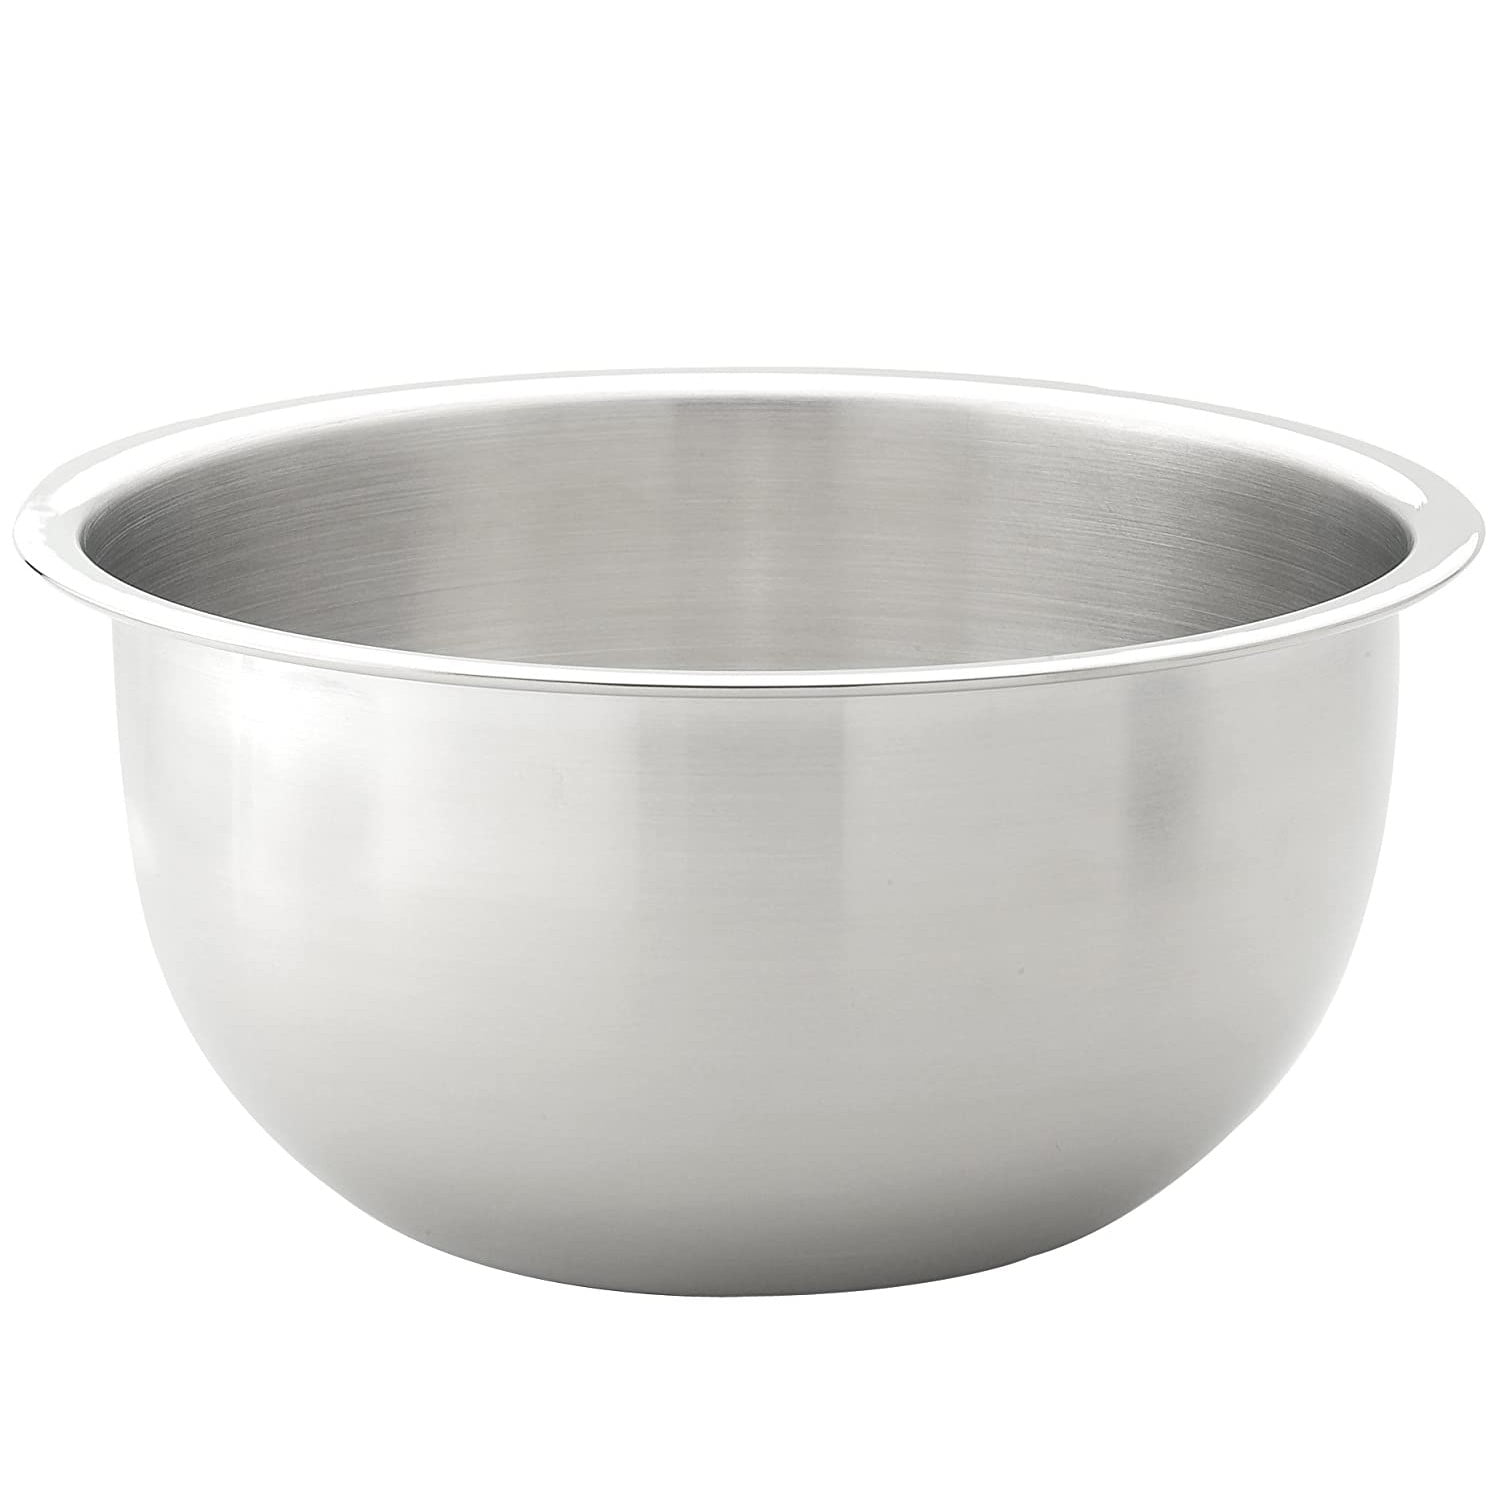 Tezzorio 8 Quart Heavy Duty Stainless Steel Mixing Bowl, 22 Gauge (0.8 Mm)  Flat Base Bowl with Curved lip, Heavyweight Mixing Bowls/Prep Bowls